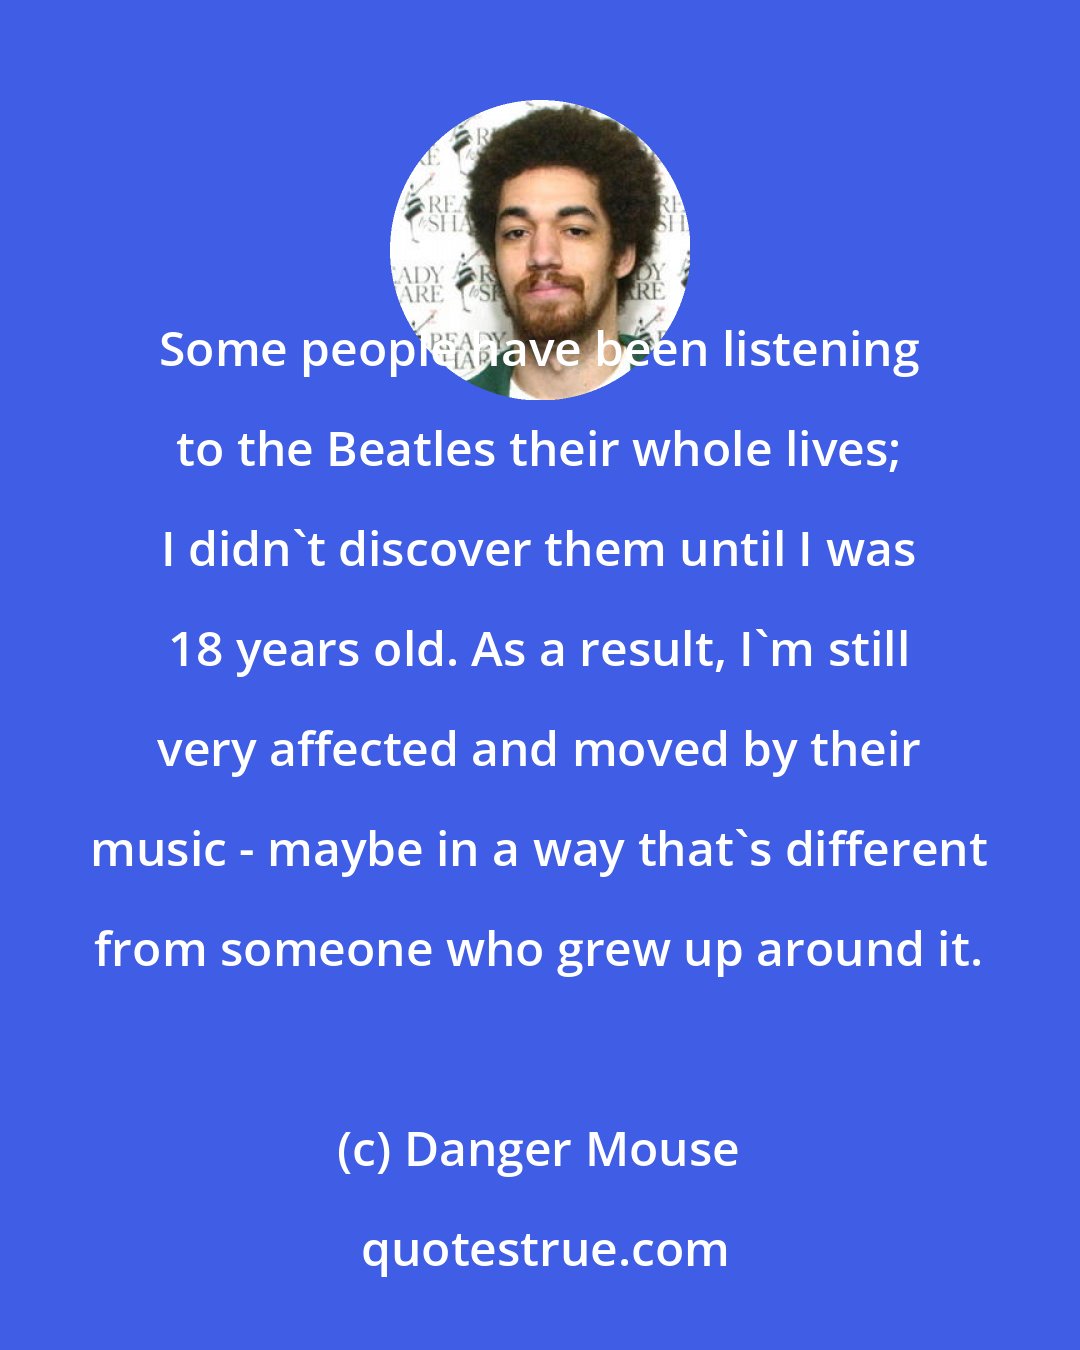 Danger Mouse: Some people have been listening to the Beatles their whole lives; I didn't discover them until I was 18 years old. As a result, I'm still very affected and moved by their music - maybe in a way that's different from someone who grew up around it.